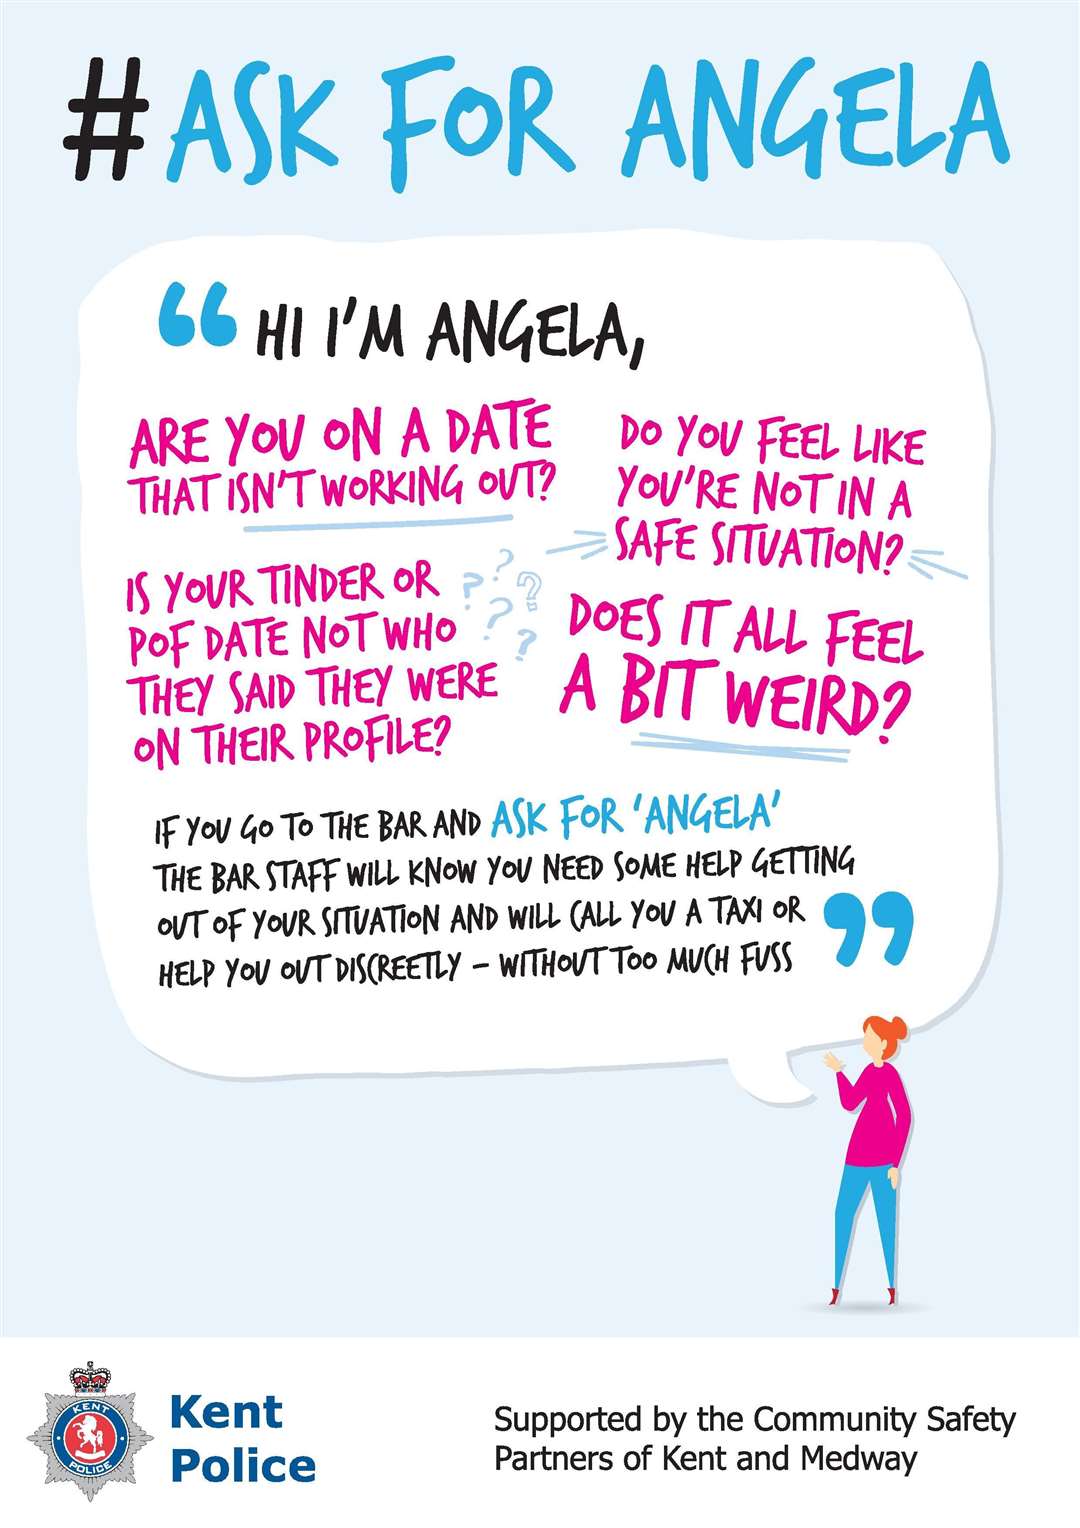 Pubs and bars display this poster as part of the 'Ask for Angela' initiative